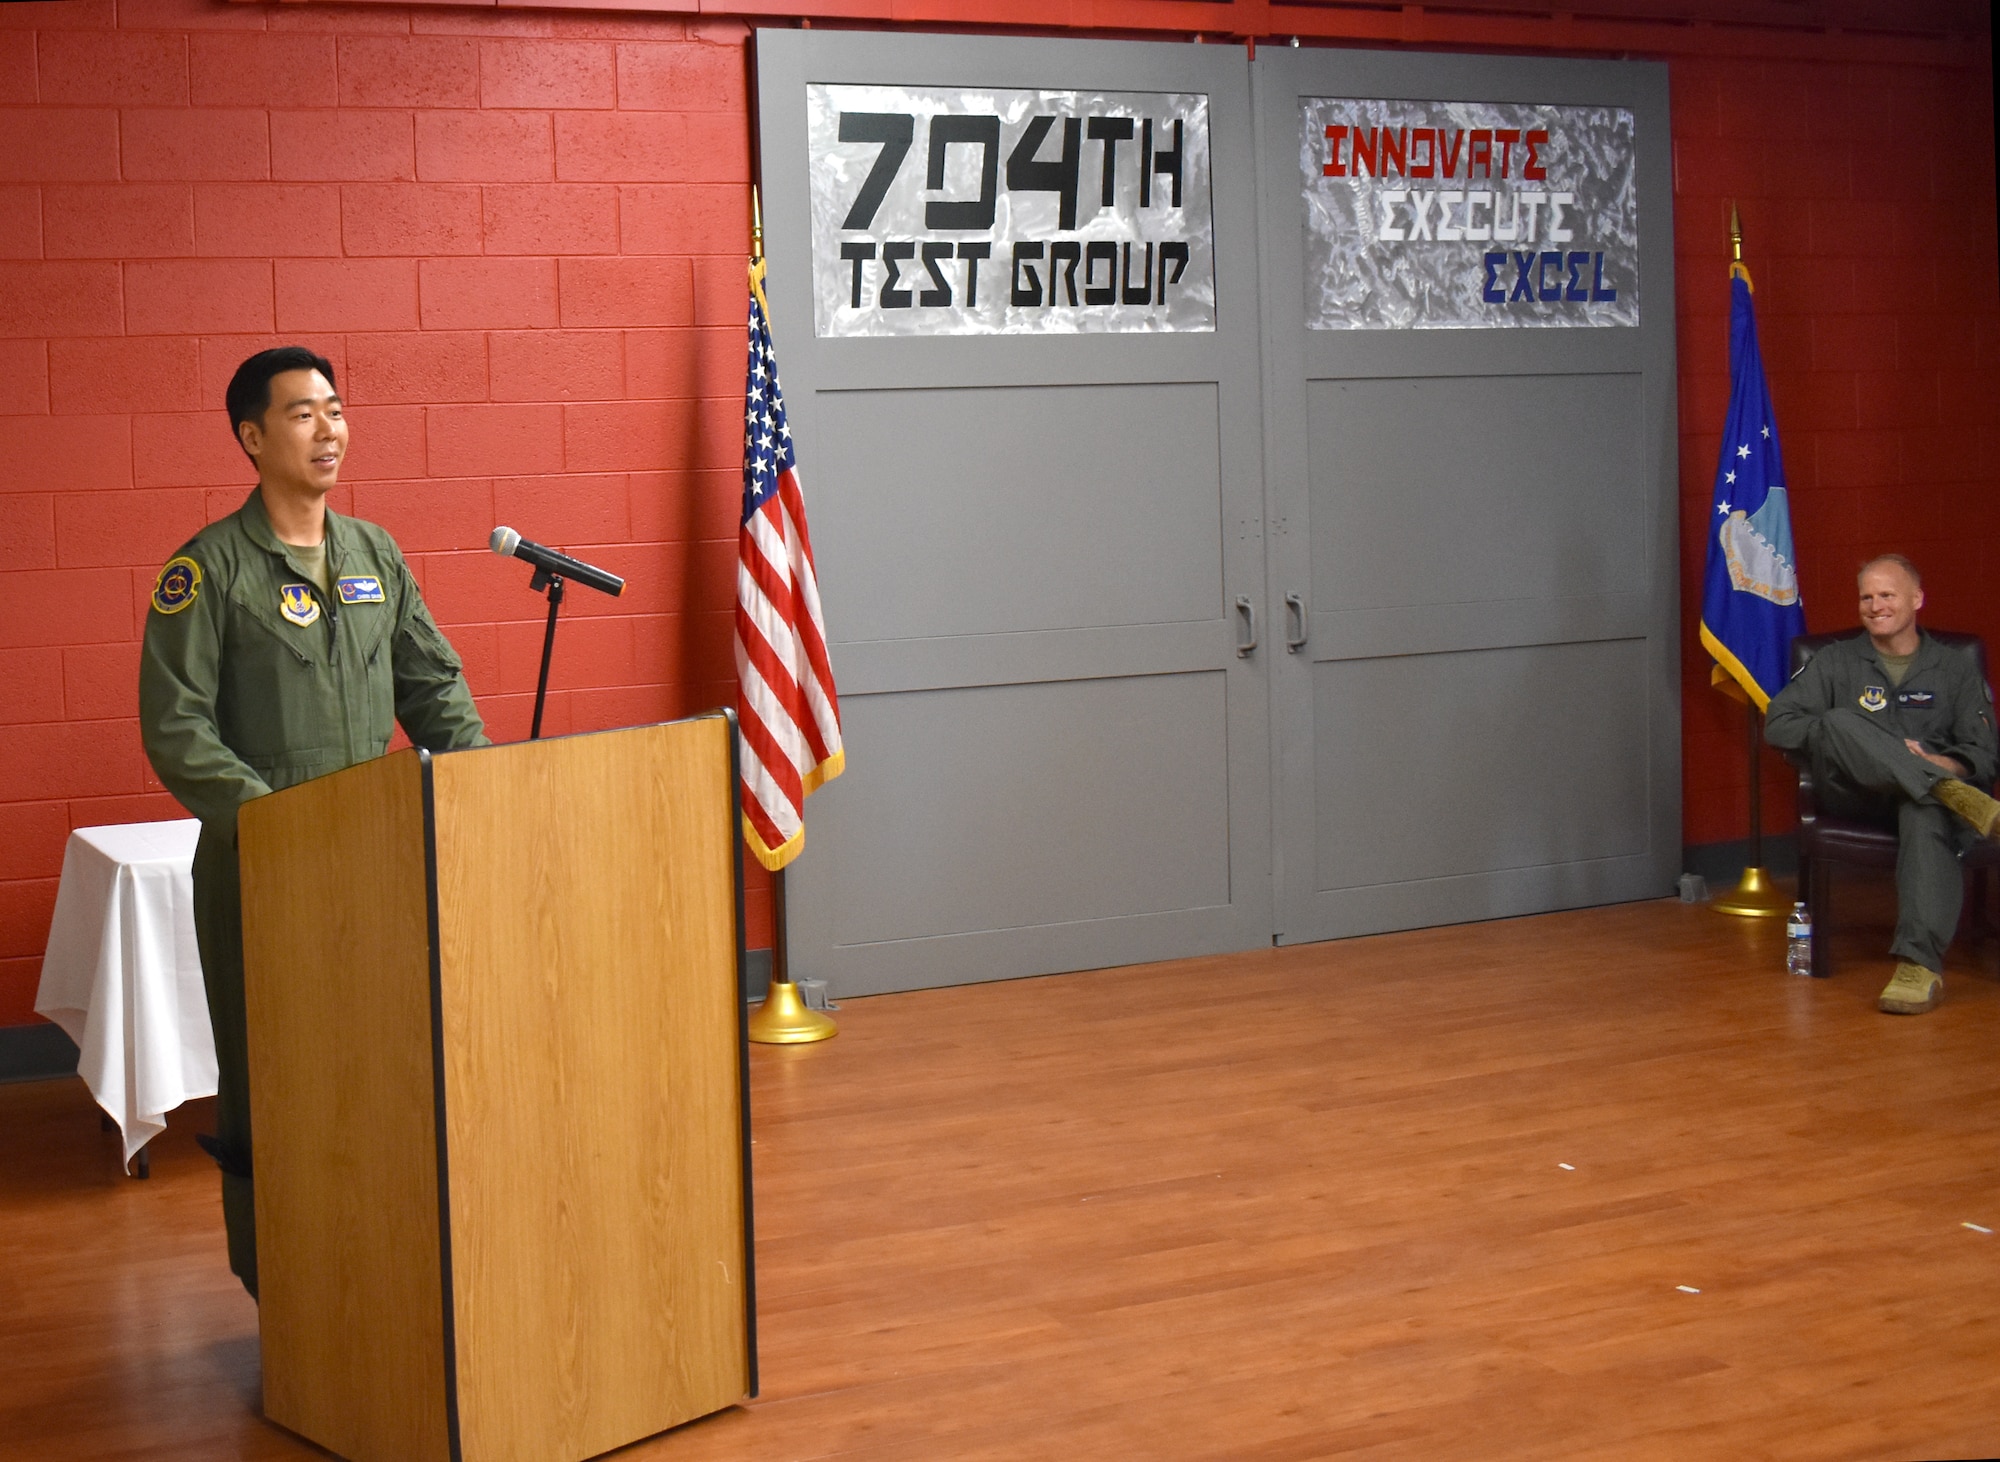 Lt. Col. Brian Davis, the new commander of the 746th Test Squadron, speaks to those in attendance at a Change of Command Ceremony at Holloman Air Force Base, New Mexico, June 8, 2022.